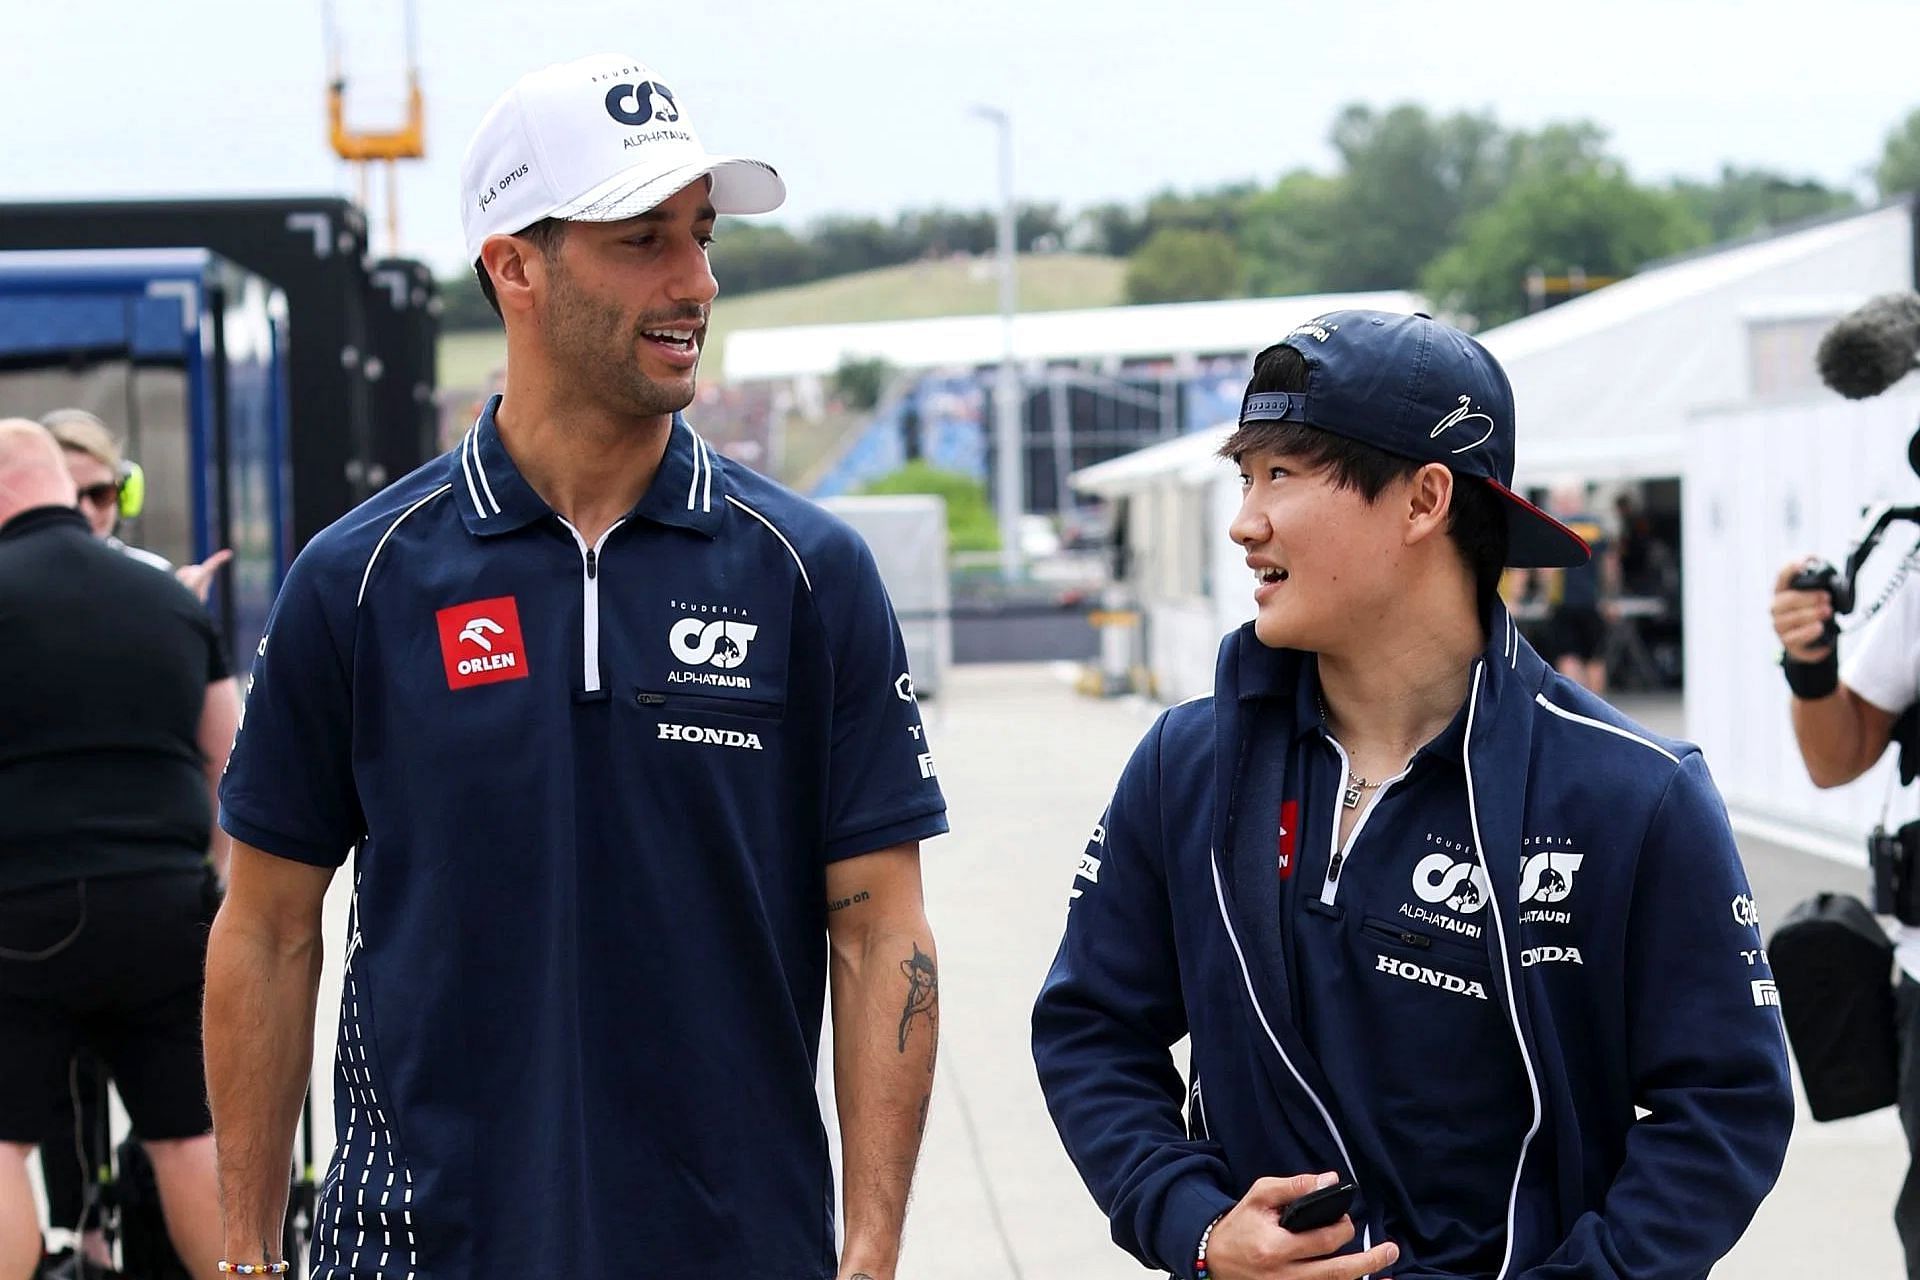 Daniel Ricciardo and Yuki Tsunoda talk in the paddock during practice ahead of the 2023 F1 Hungarian Grand Prix (Photo by Peter Fox/Getty Images)